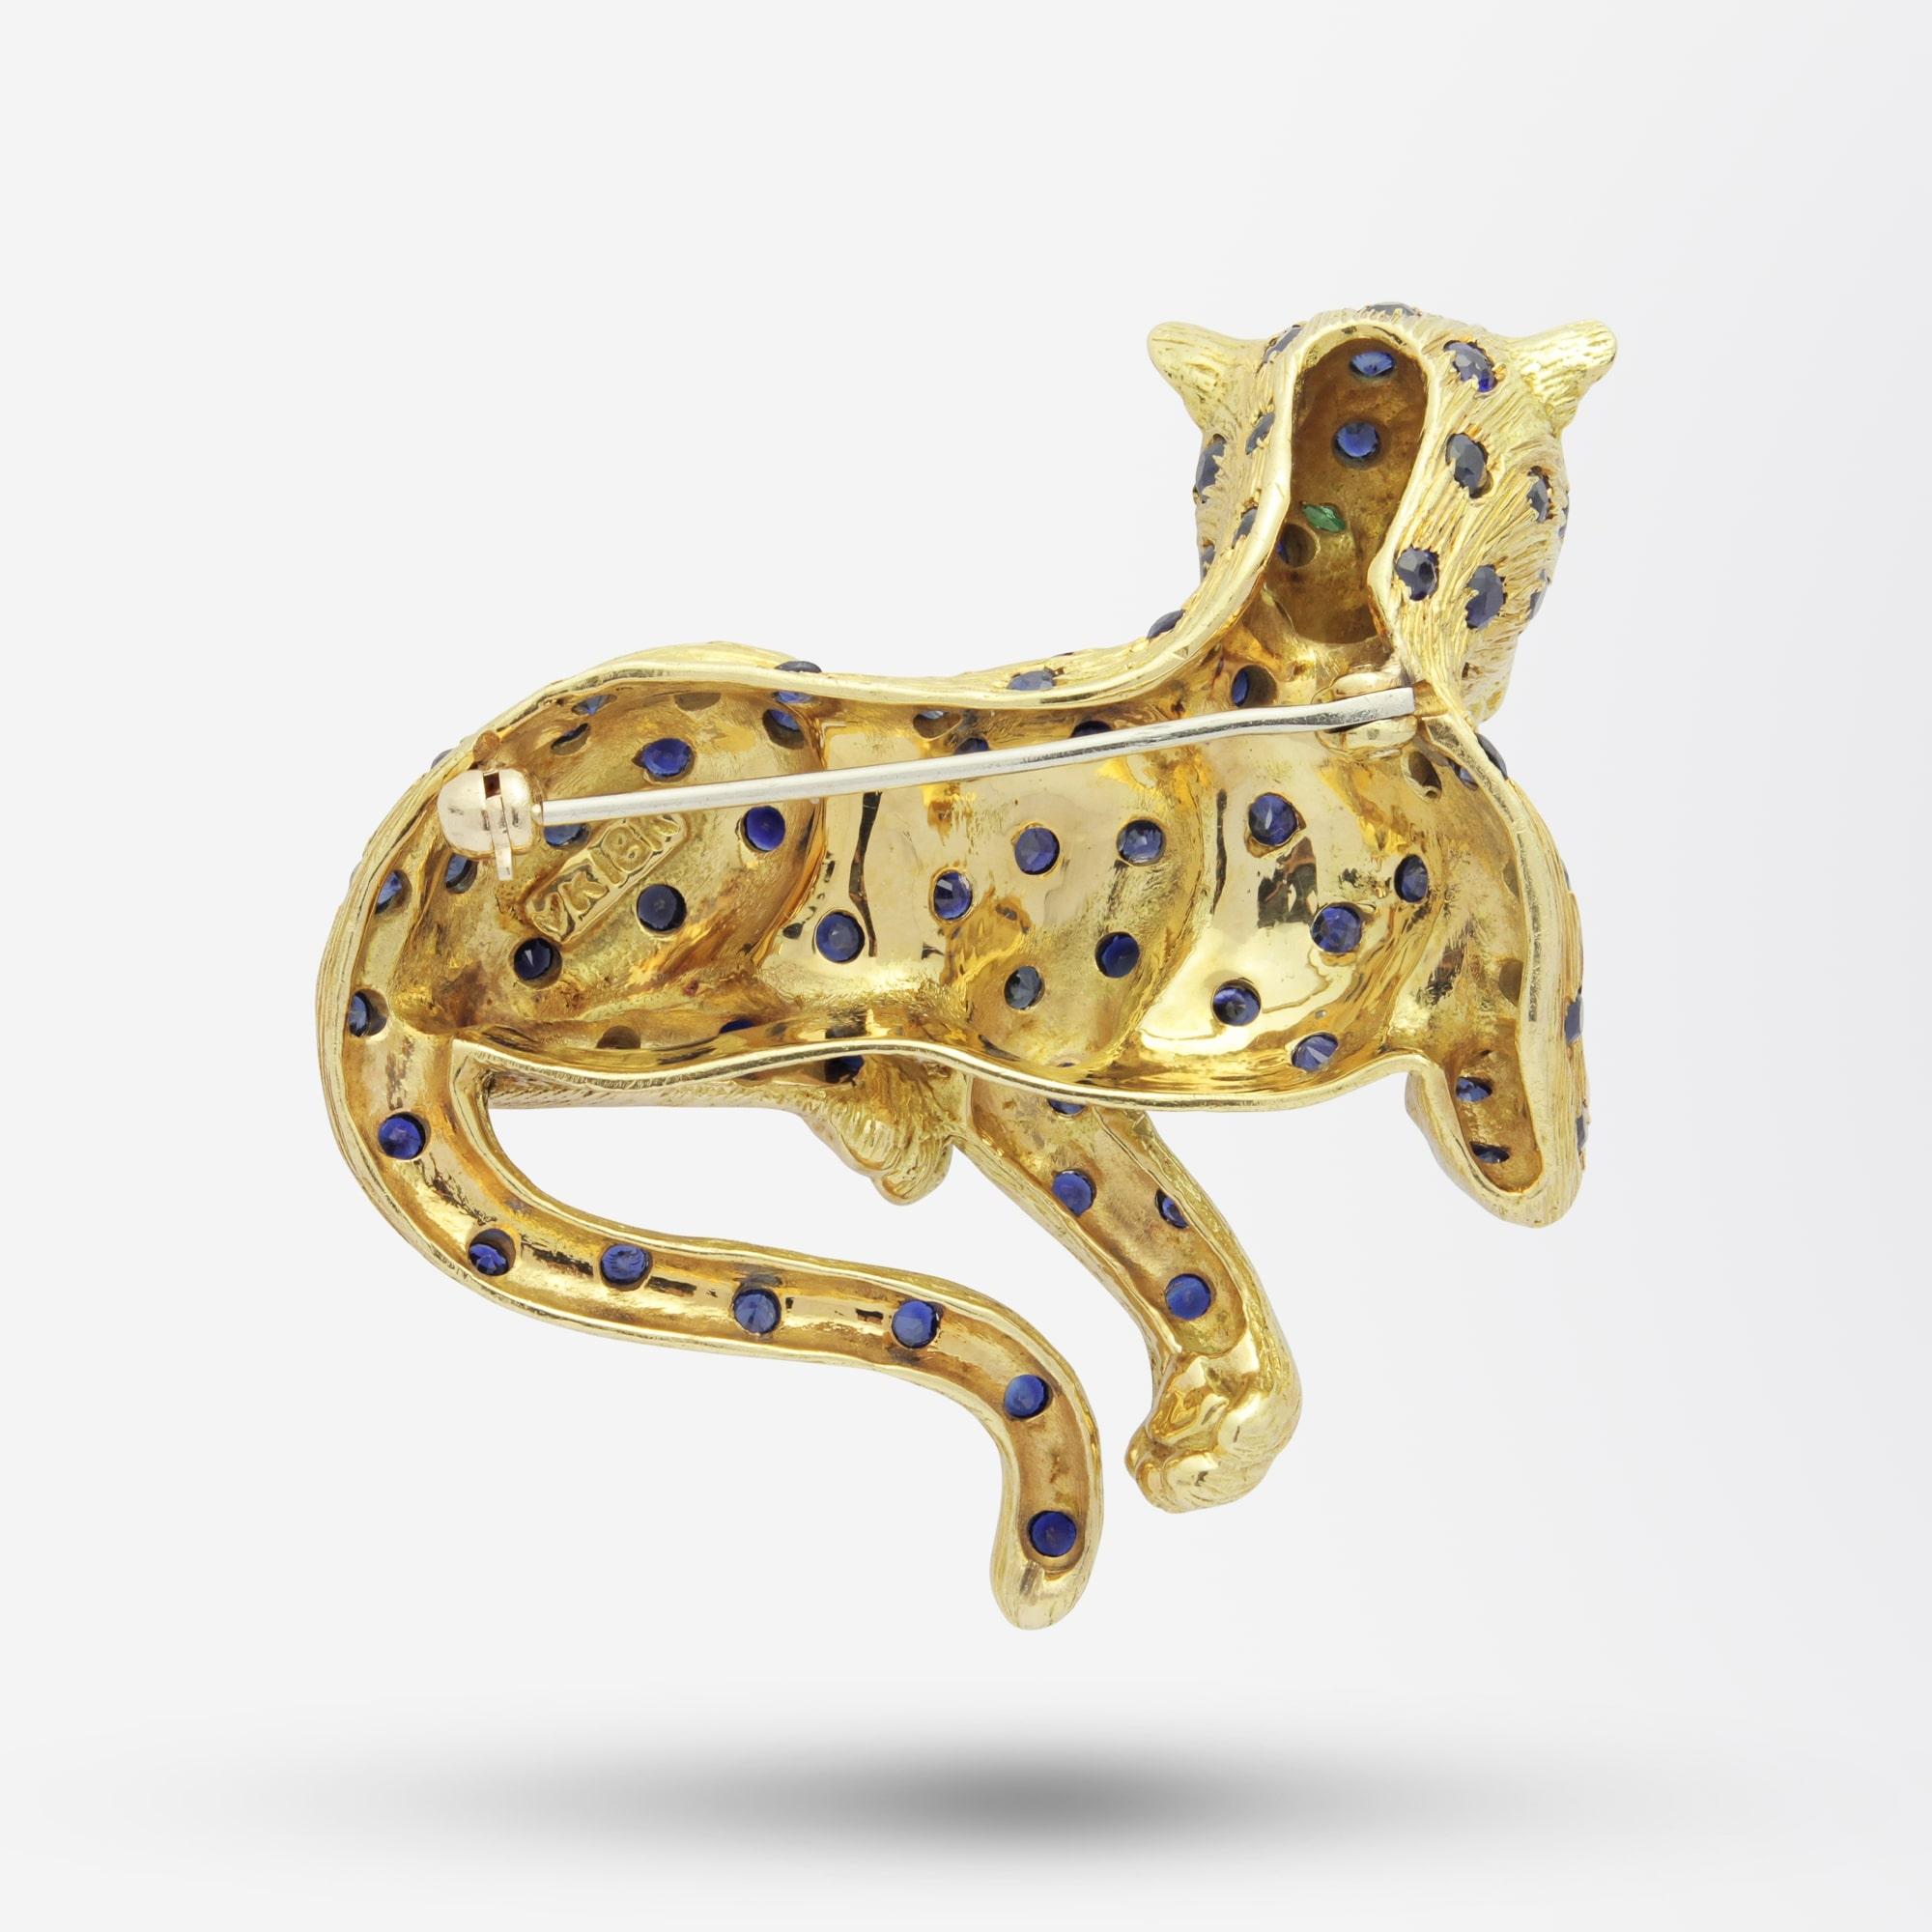 A wonderfully heavy and well made Leopard brooch pin in 18 karat yellow gold in the manner of Cartier. The pin features 69 stones in total and comprises of two marquise emeralds and 67 round sapphires. The textured yellow gold body of the leopard is